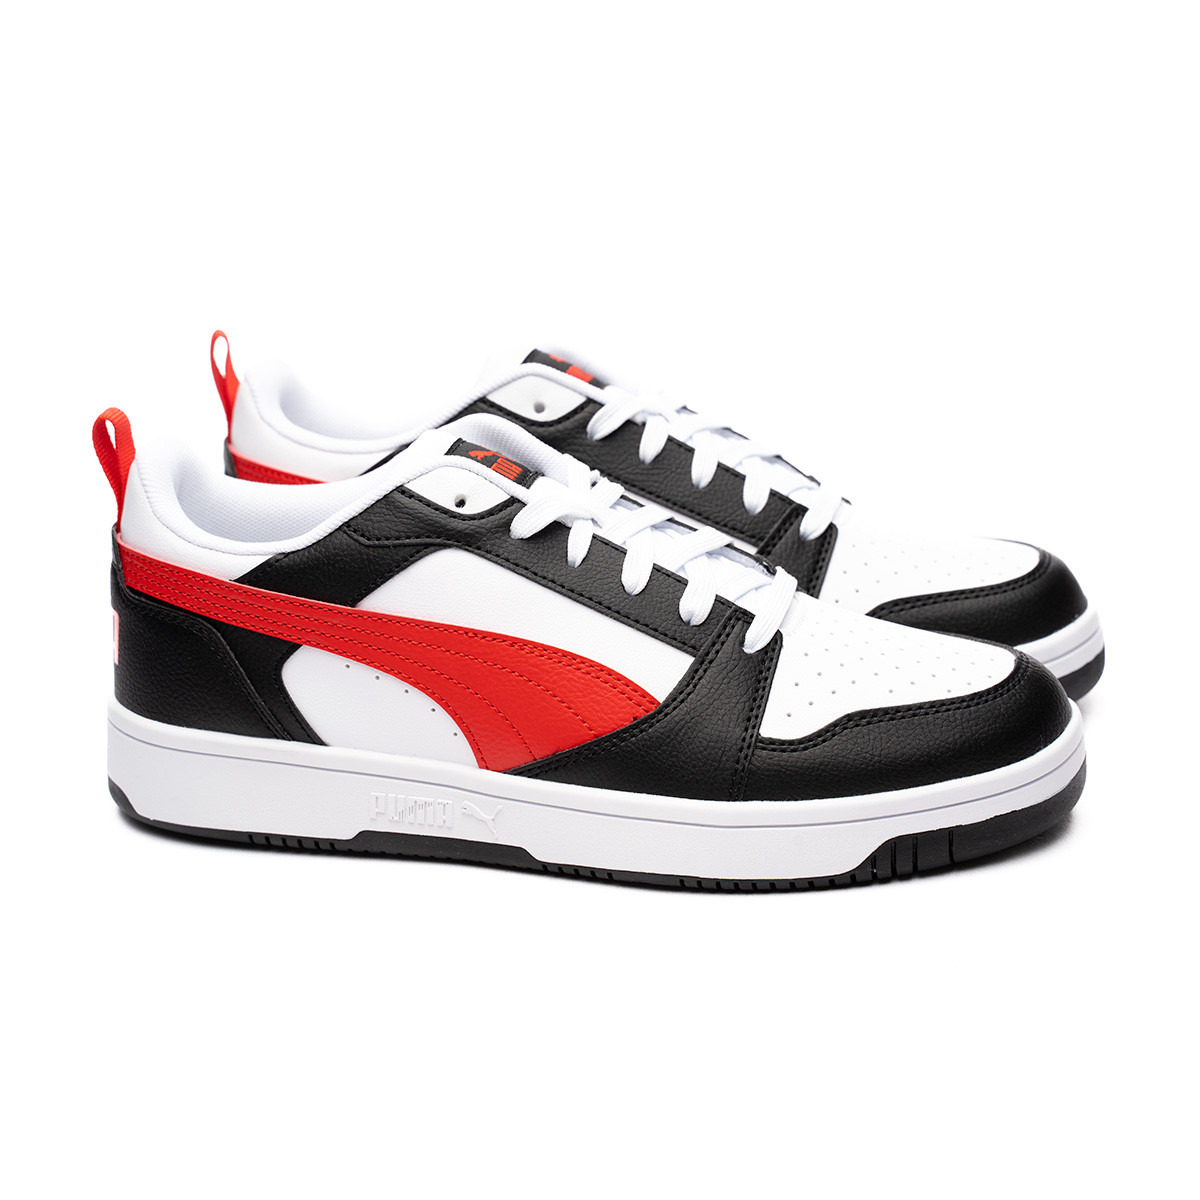 Fútbol Red- Time White-For Rebound All Low Trainers - Black Emotion v6 Puma